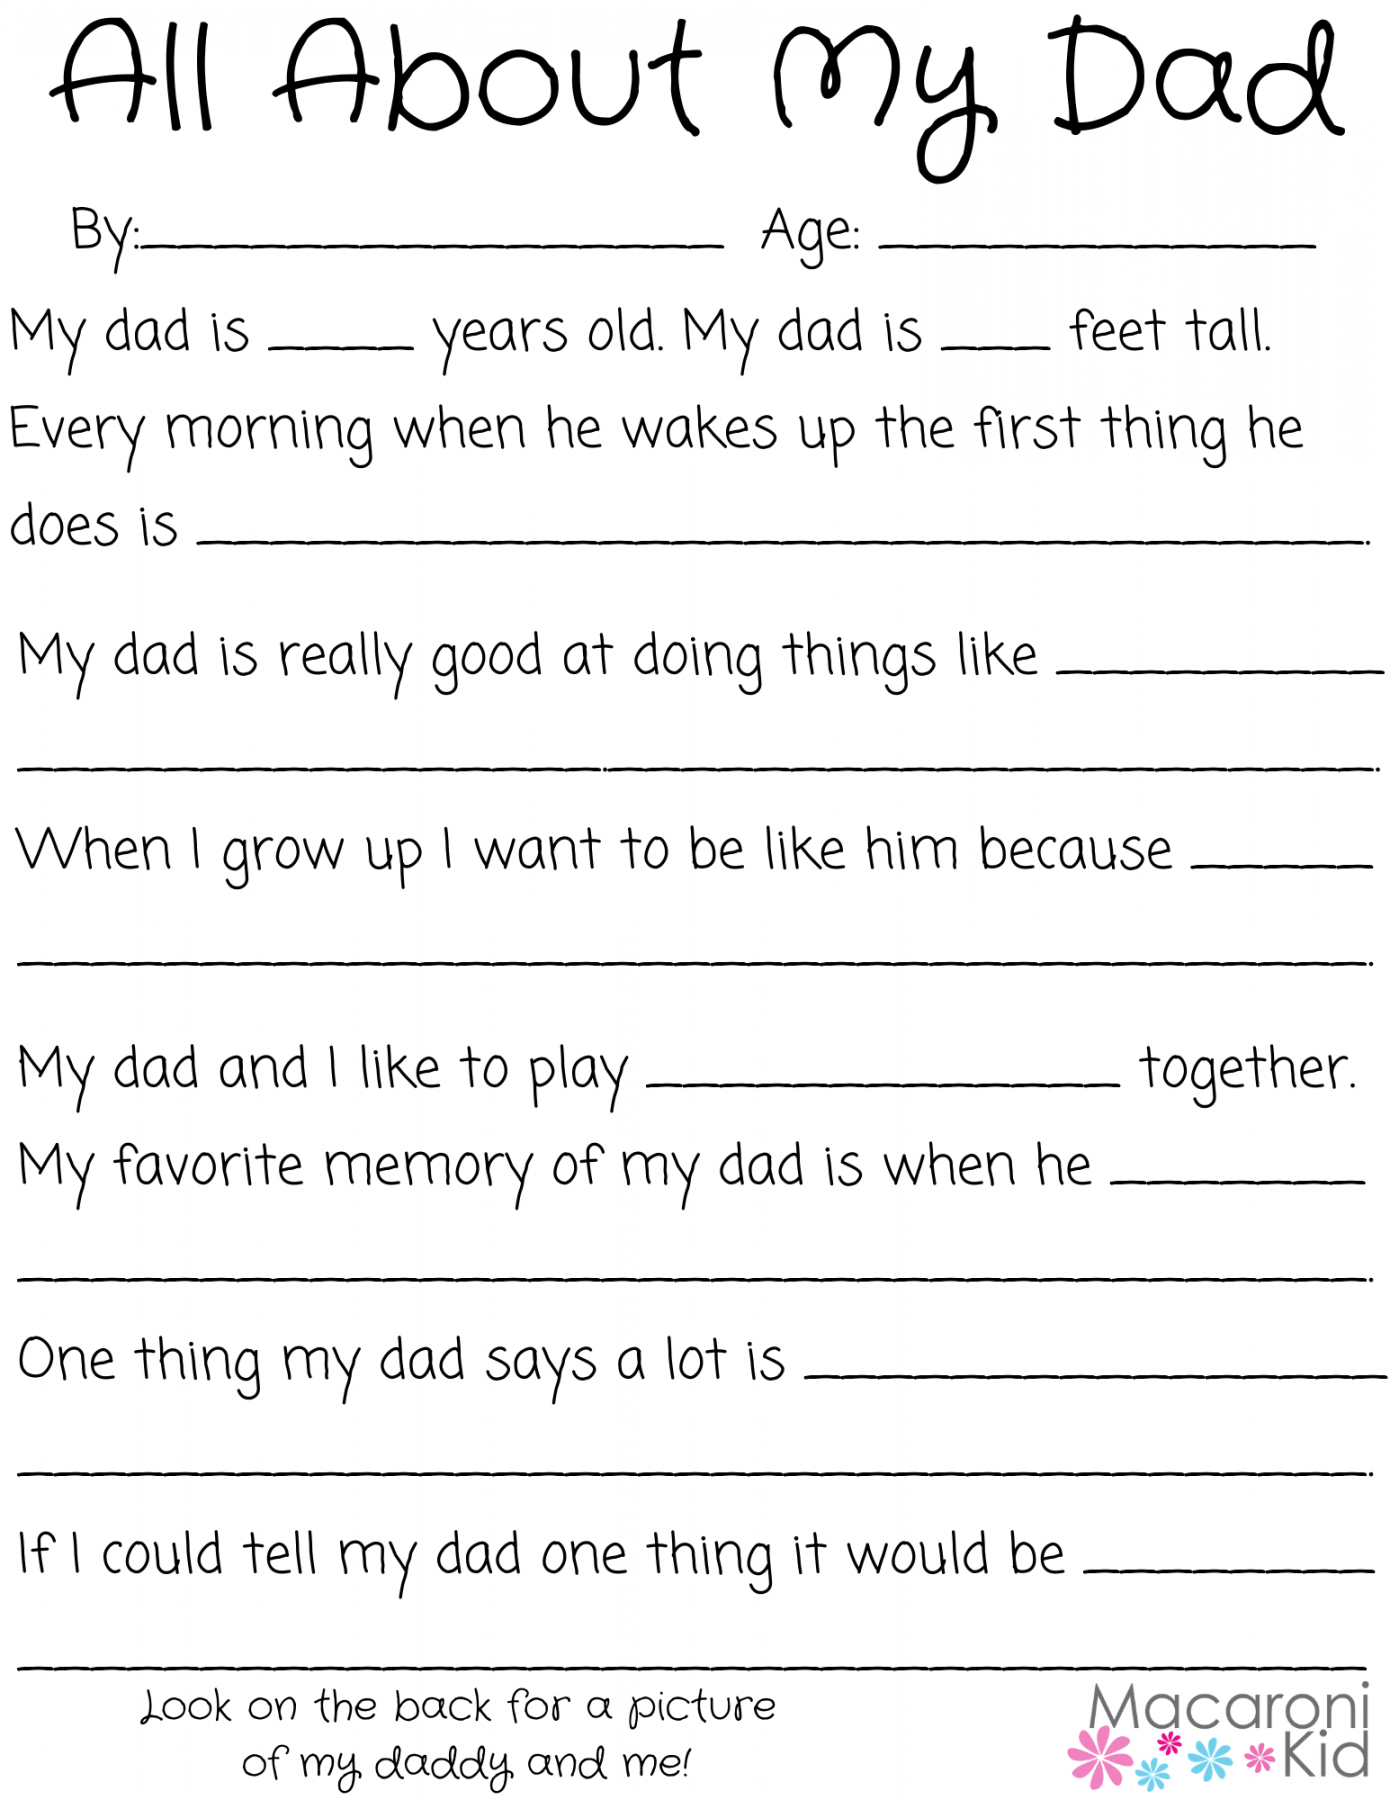 All About My Dad: A Father